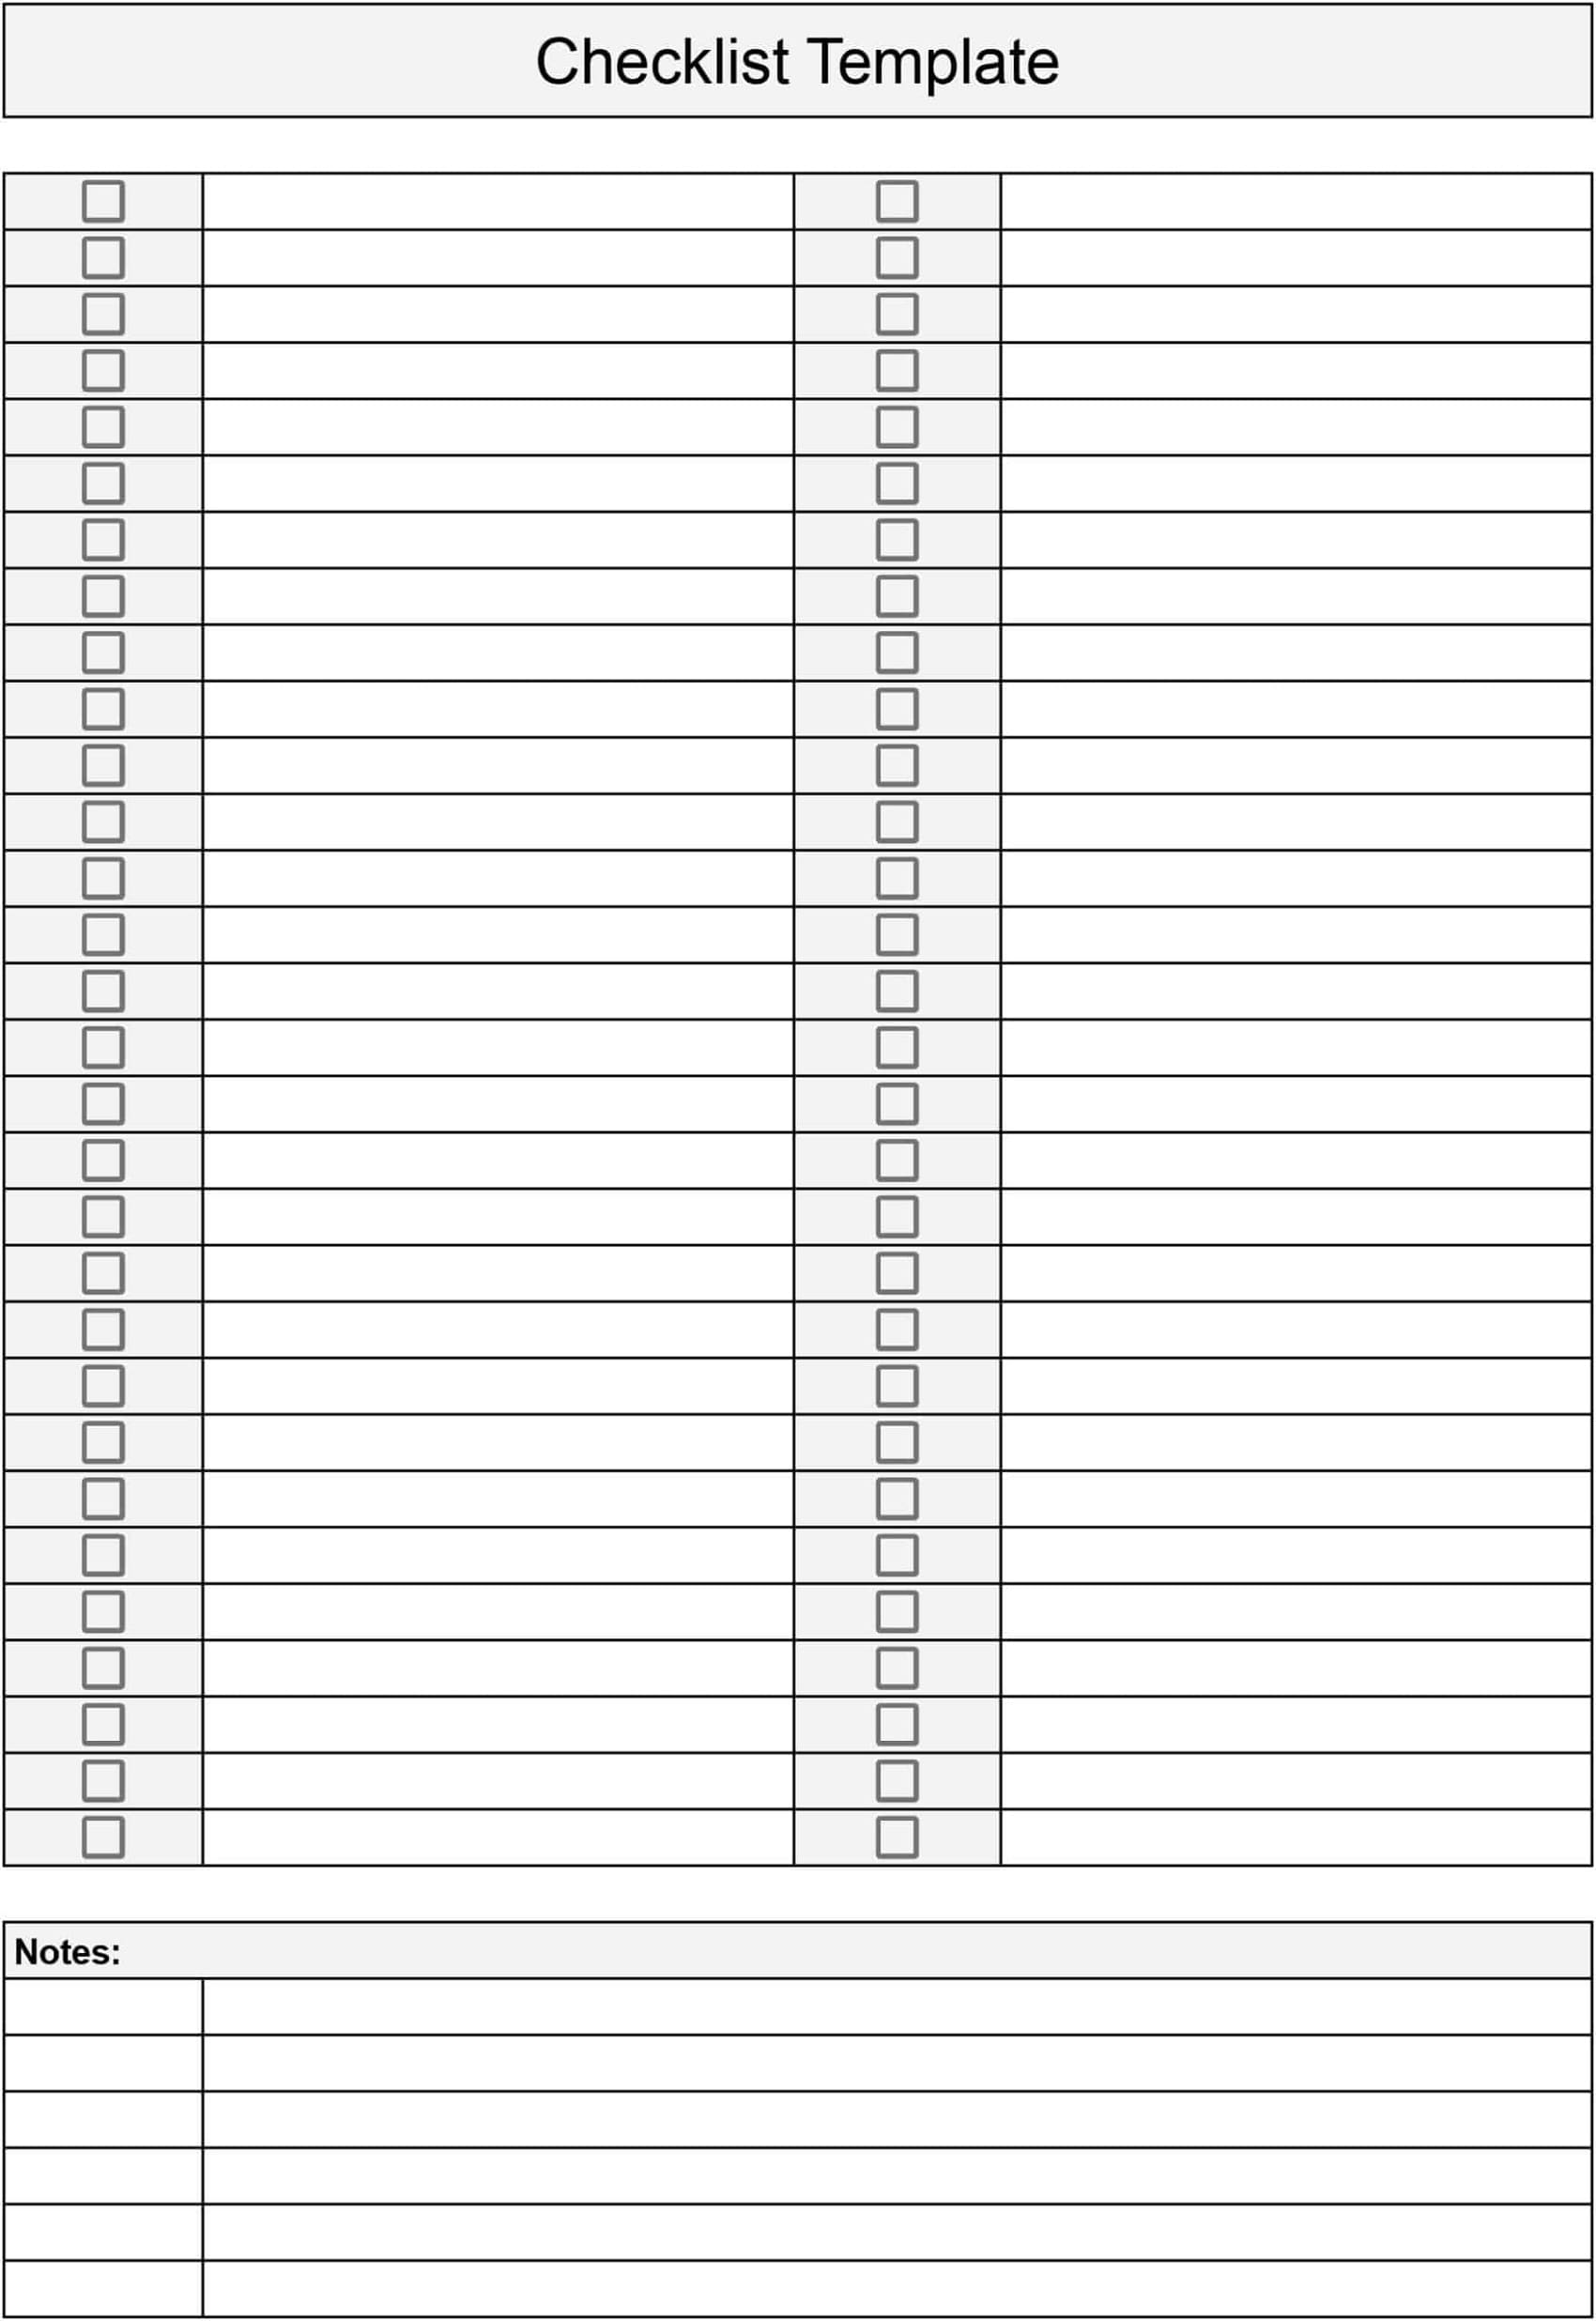 Printable Checklist Template For Free